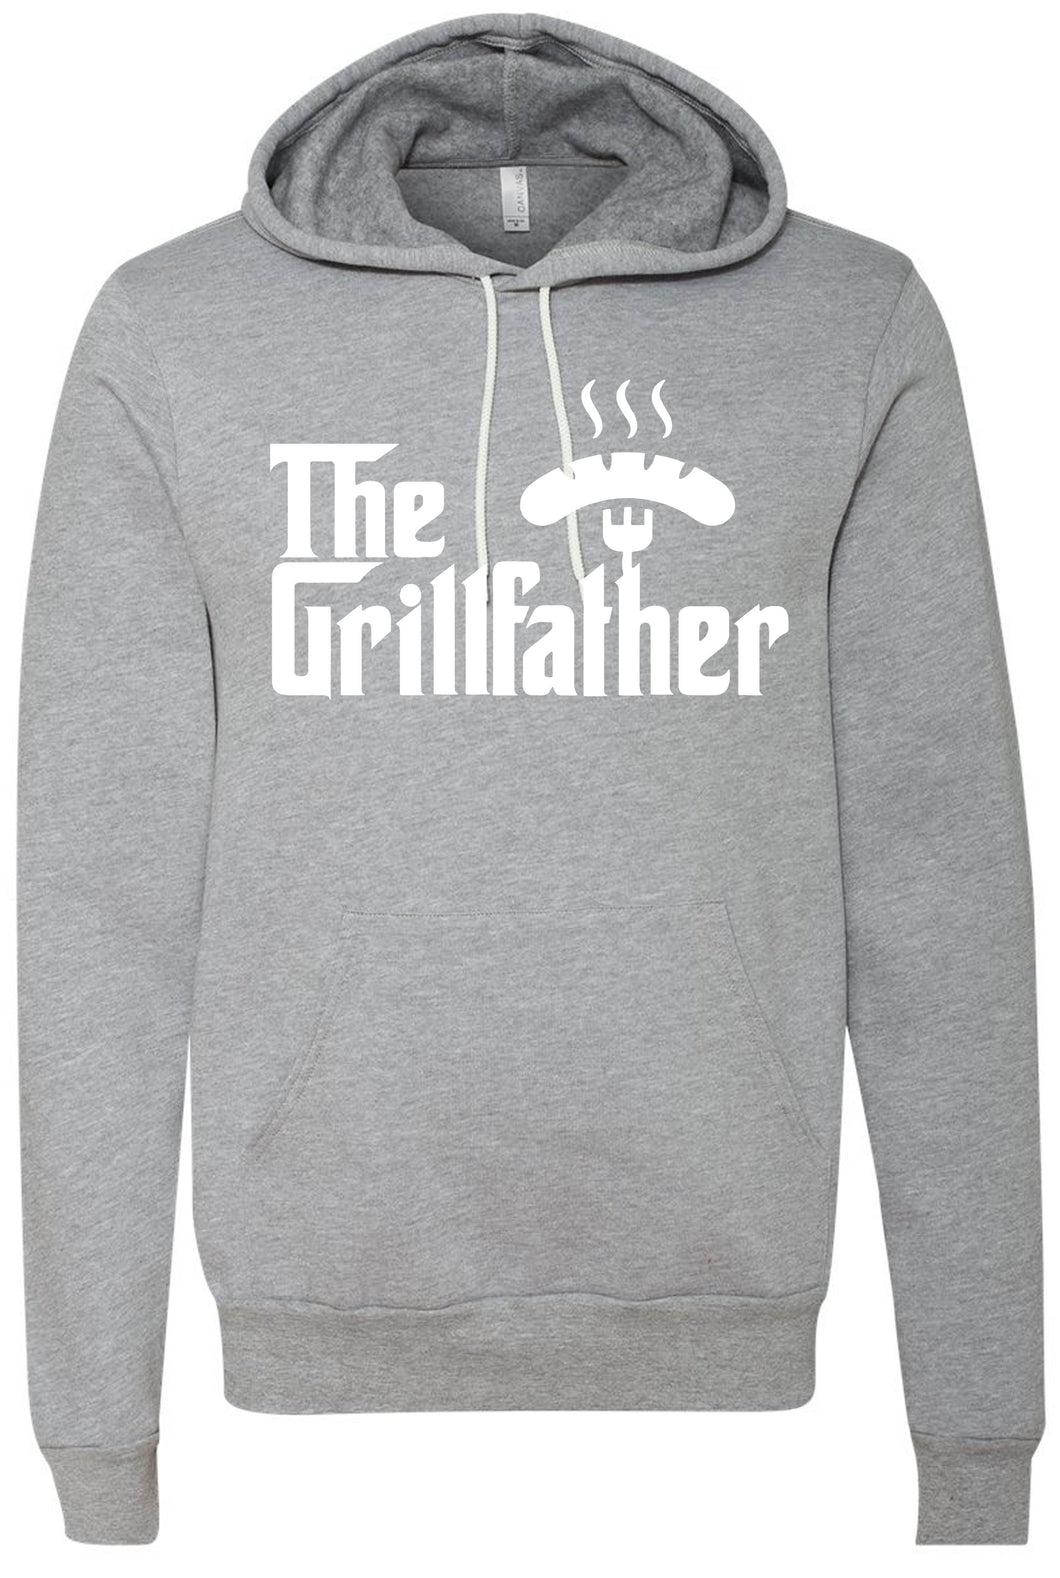 The Grill Father Hooded Sweatshirt